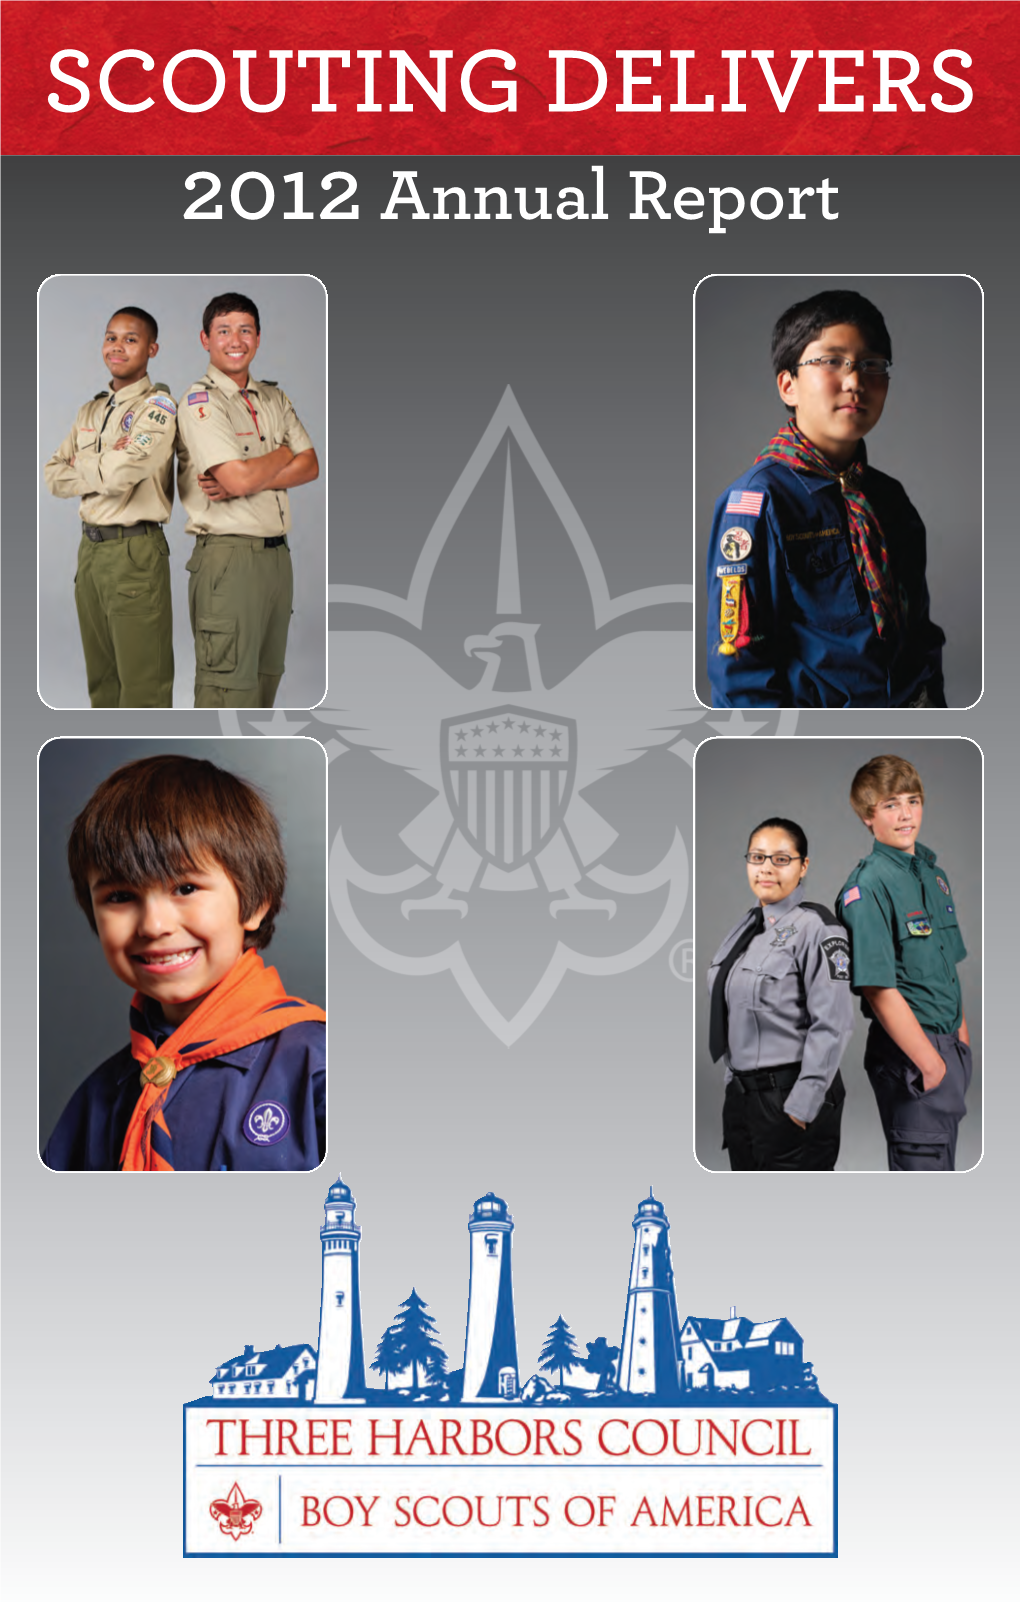 SCOUTING DELIVERS 2012 Annual Report Char•Ac•Ter Dear Scouting Friend, Council Has Seen, but Most Notably, This Is an Increase of 39% Over Just Last Year